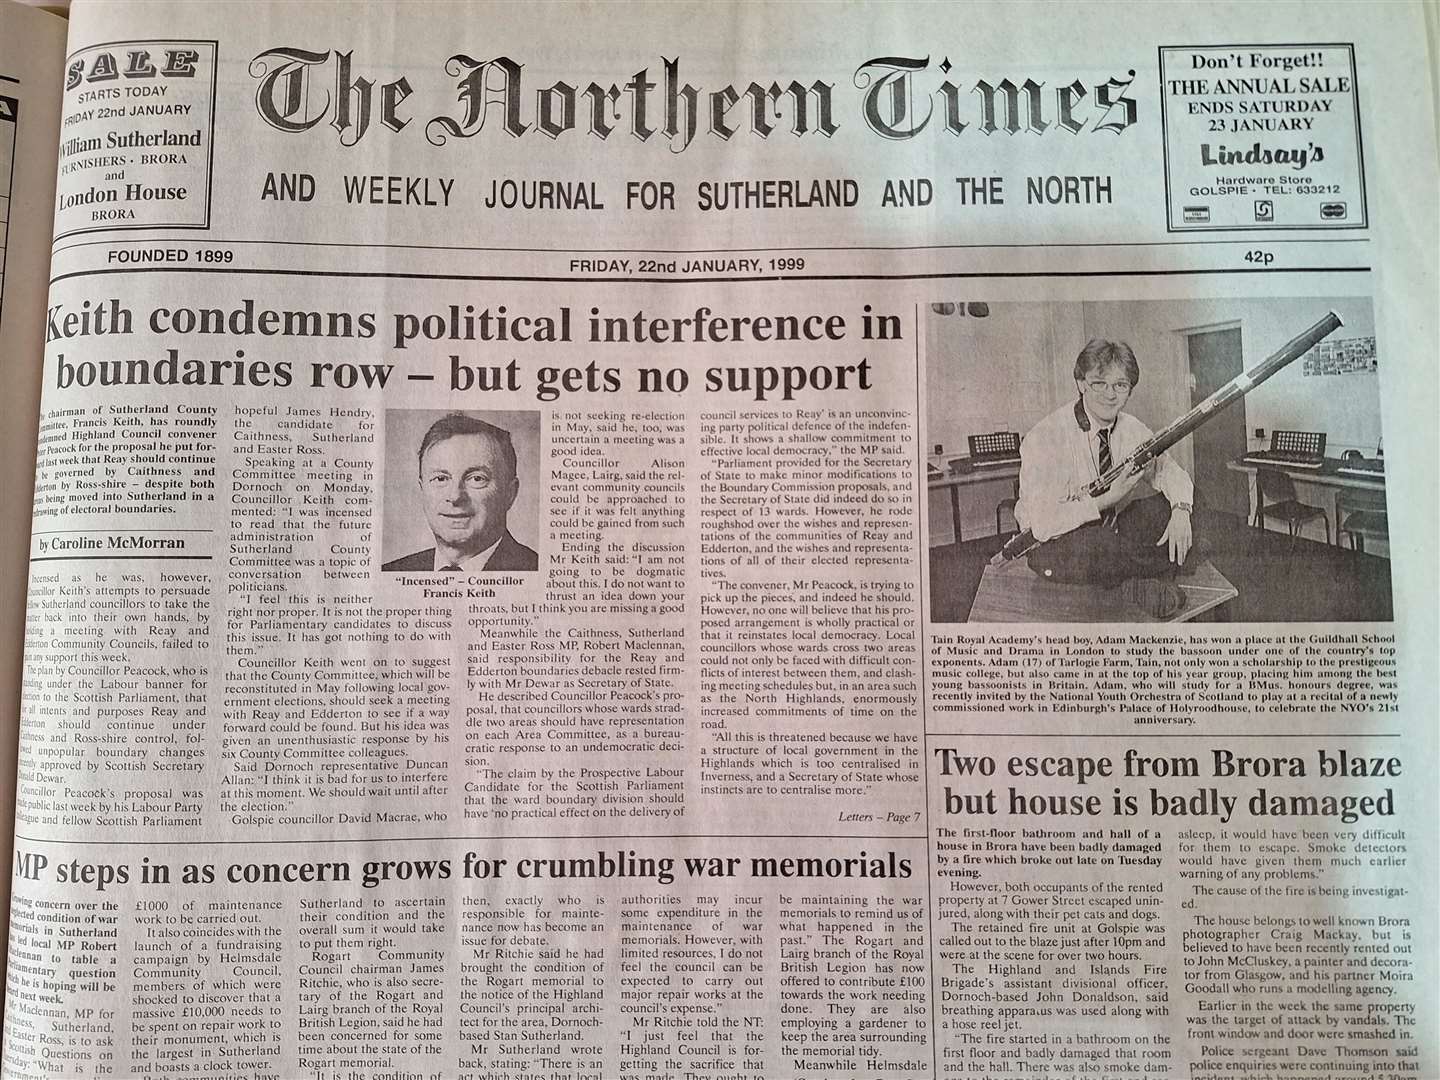 The edition of January 22, 1999.